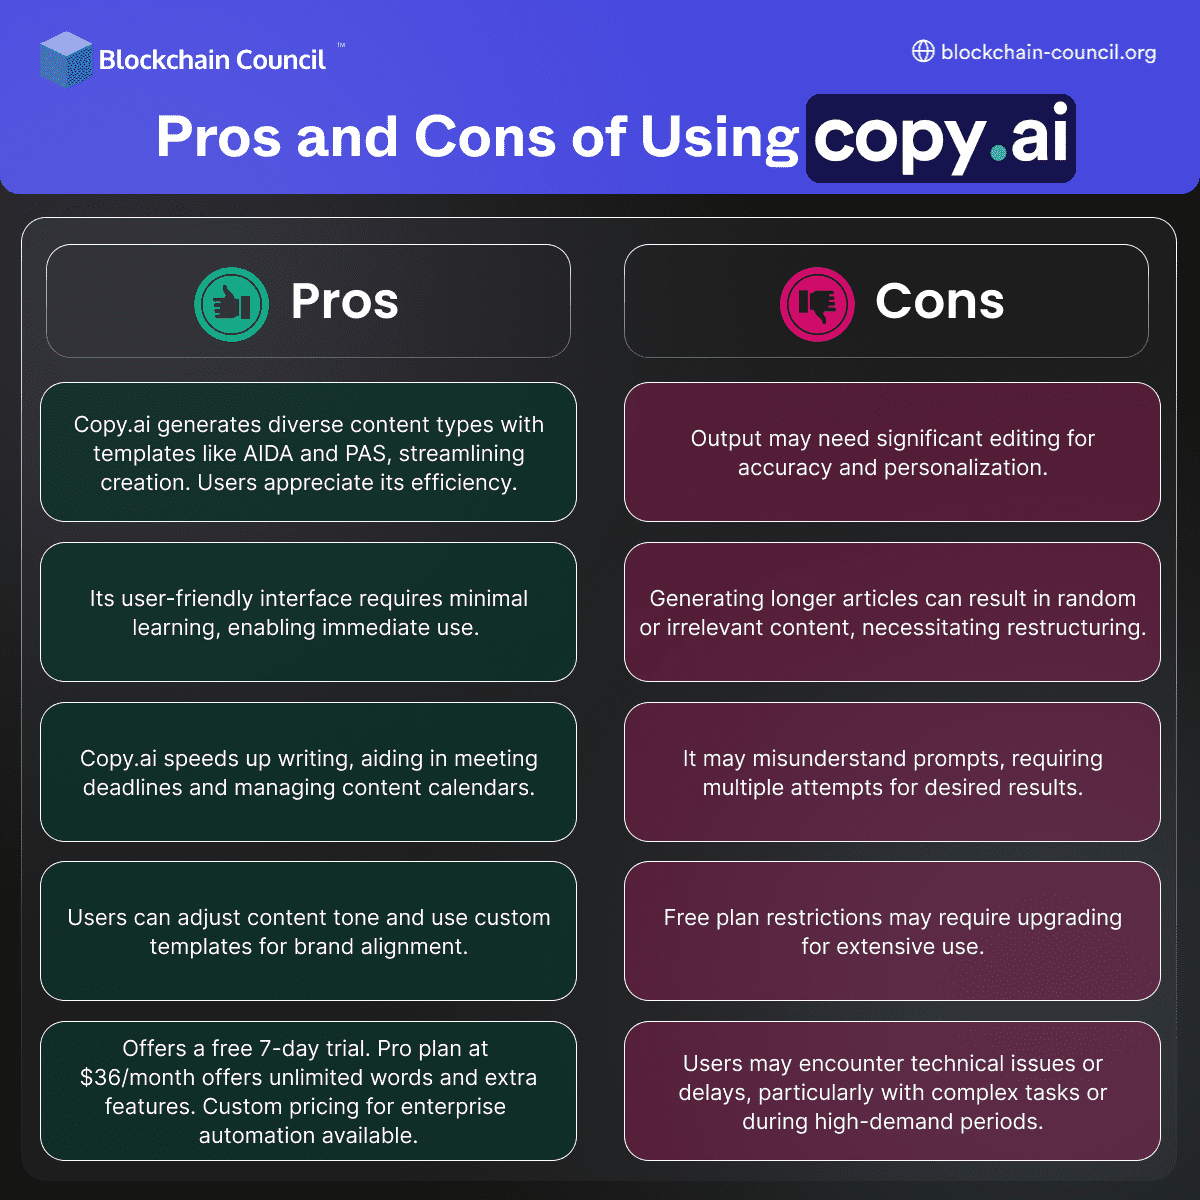 Pros and Cons of Using Copy.ai